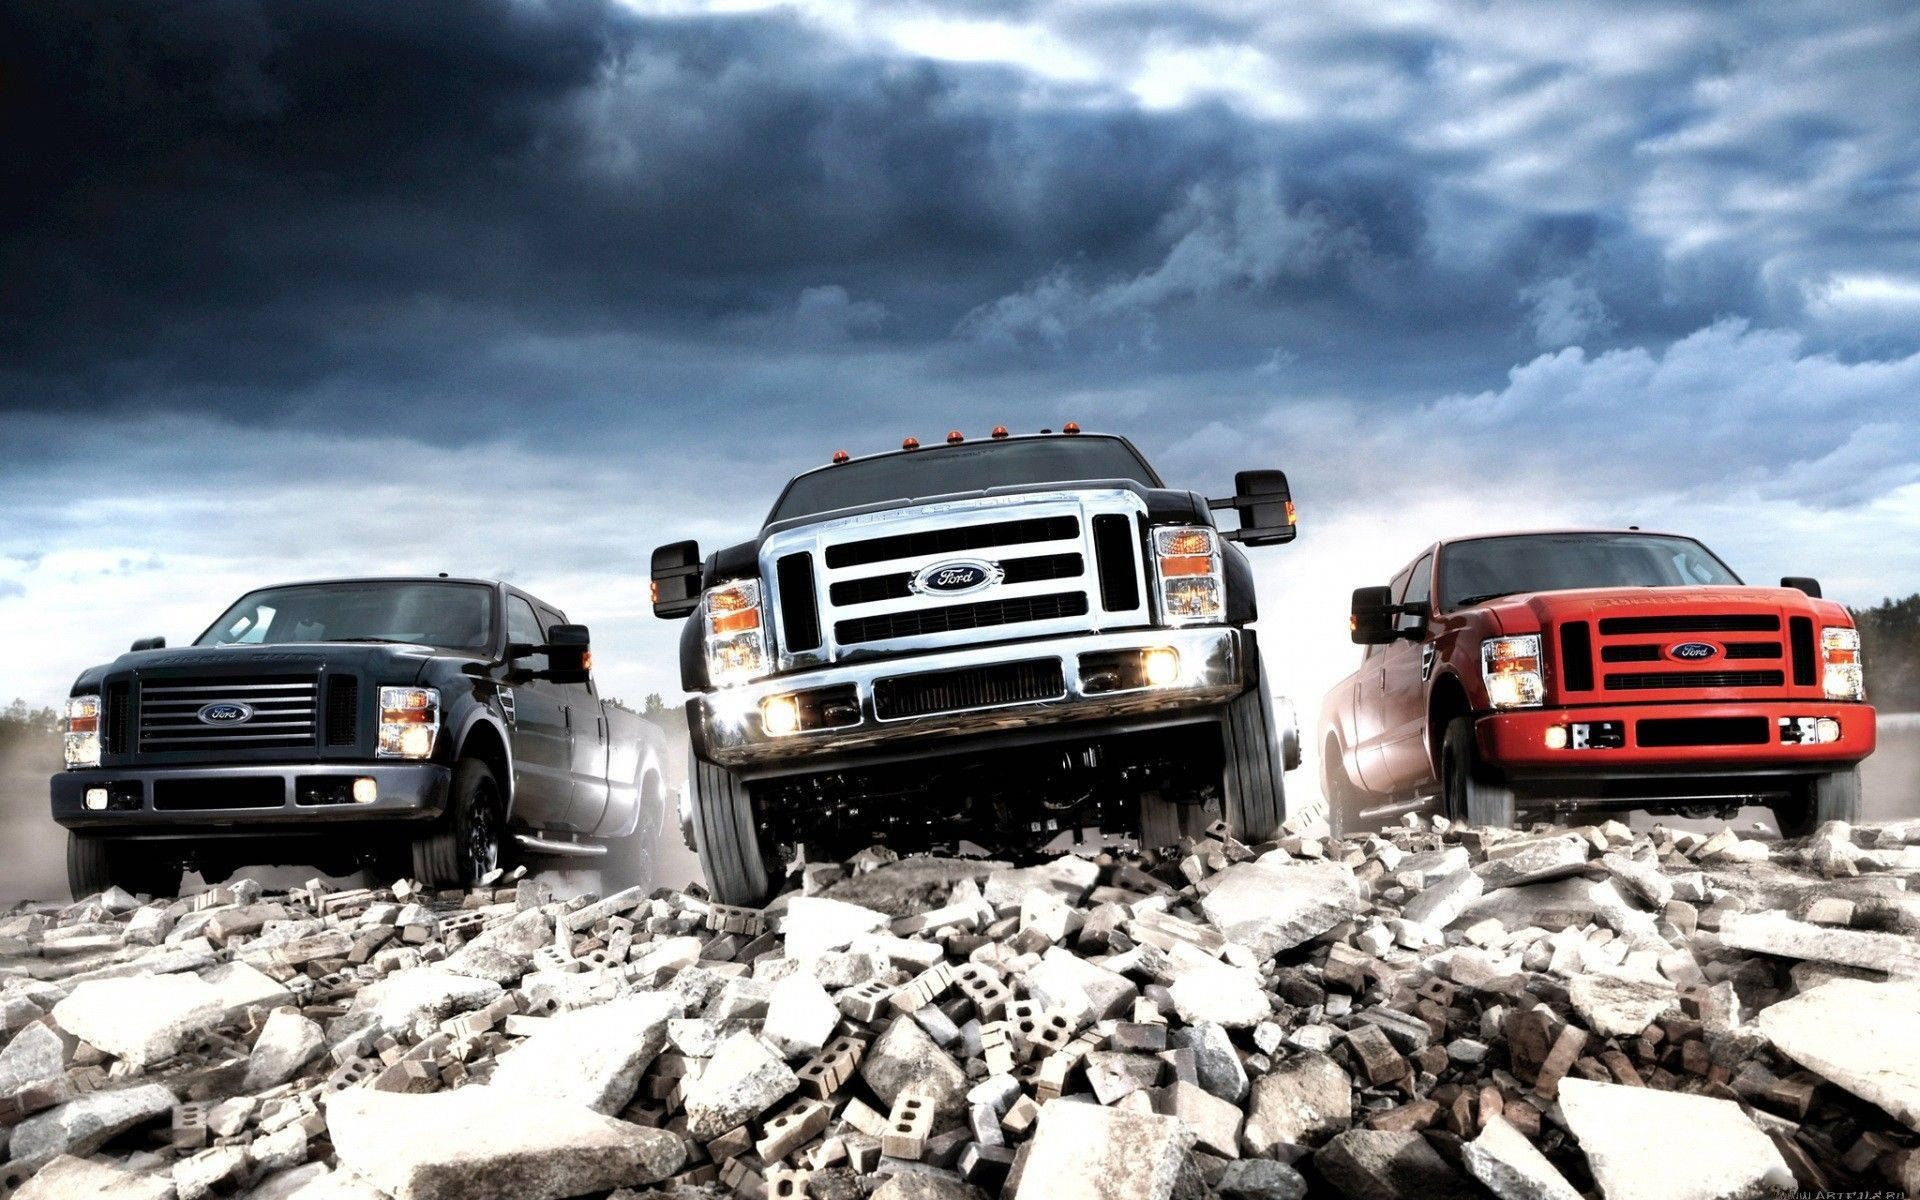 Bold and Dynamic Black and Red Truck Wallpaper